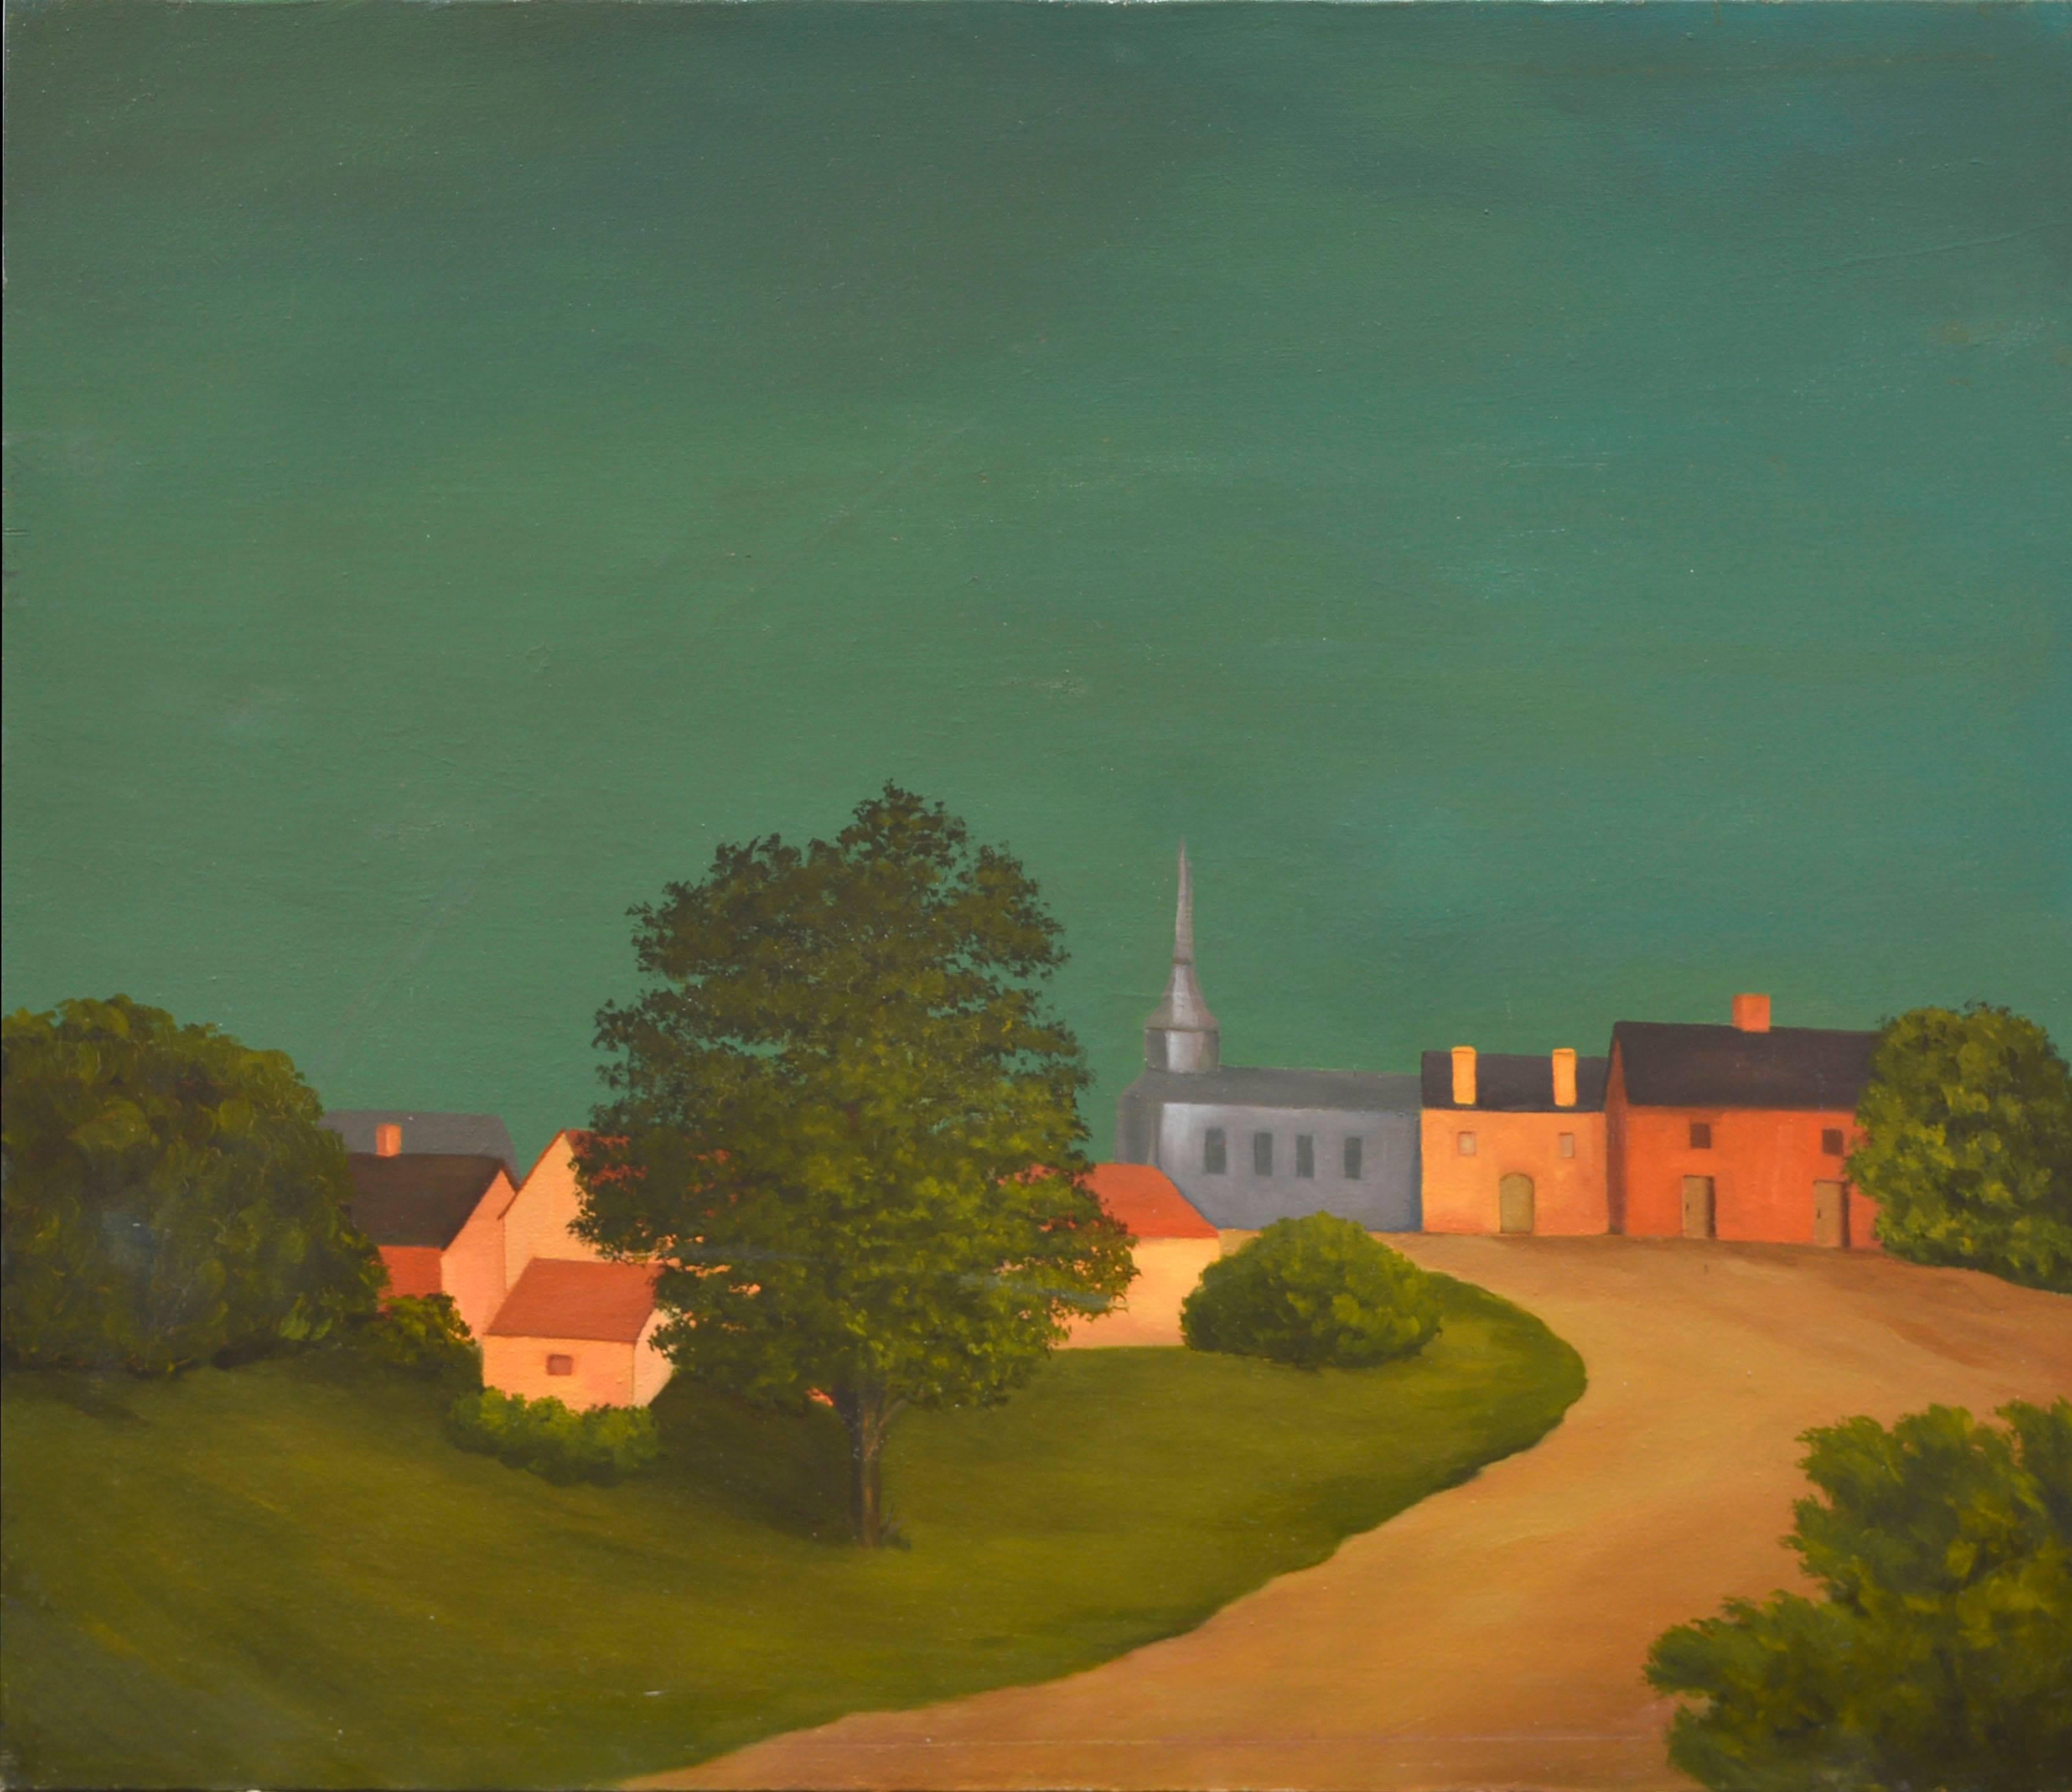 Unknown Landscape Painting - American Regionalism Small Town Landscape in Style of Grant Wood